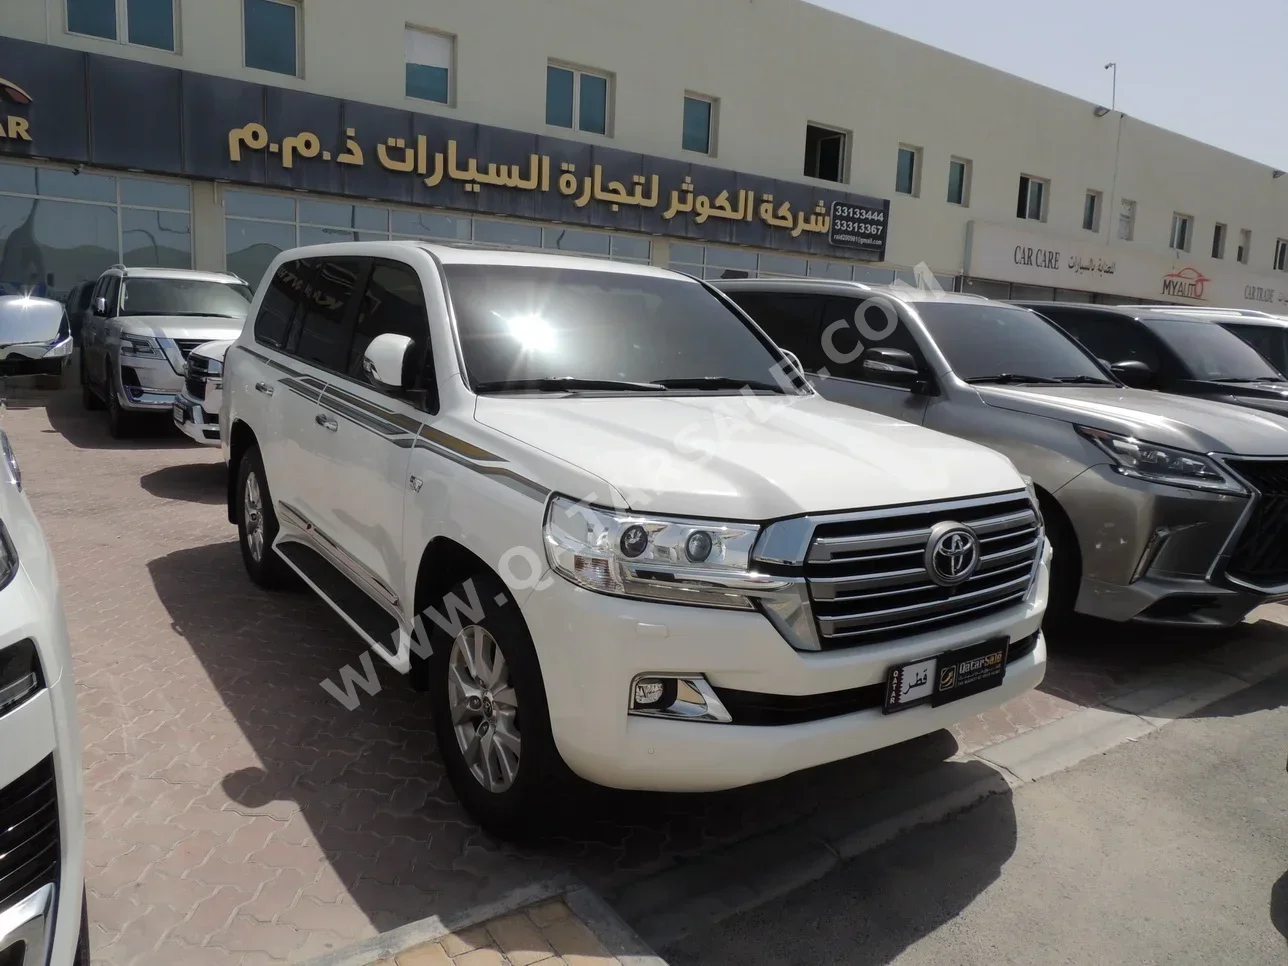  Toyota  Land Cruiser  VXR  2018  Automatic  158,000 Km  8 Cylinder  Four Wheel Drive (4WD)  SUV  White  With Warranty